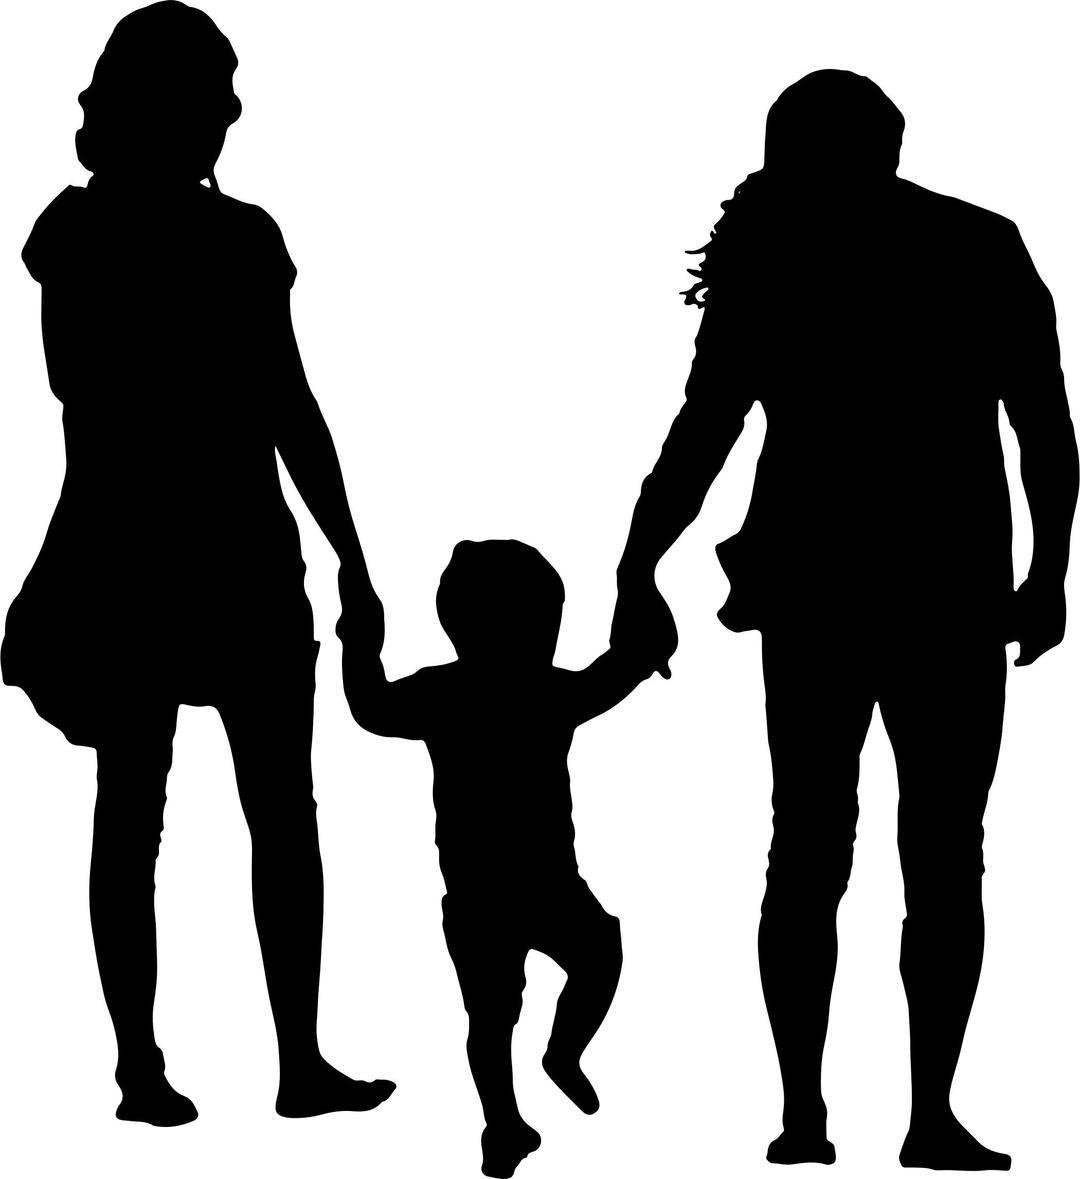 Family With Child In The Middle Silhouette png transparent